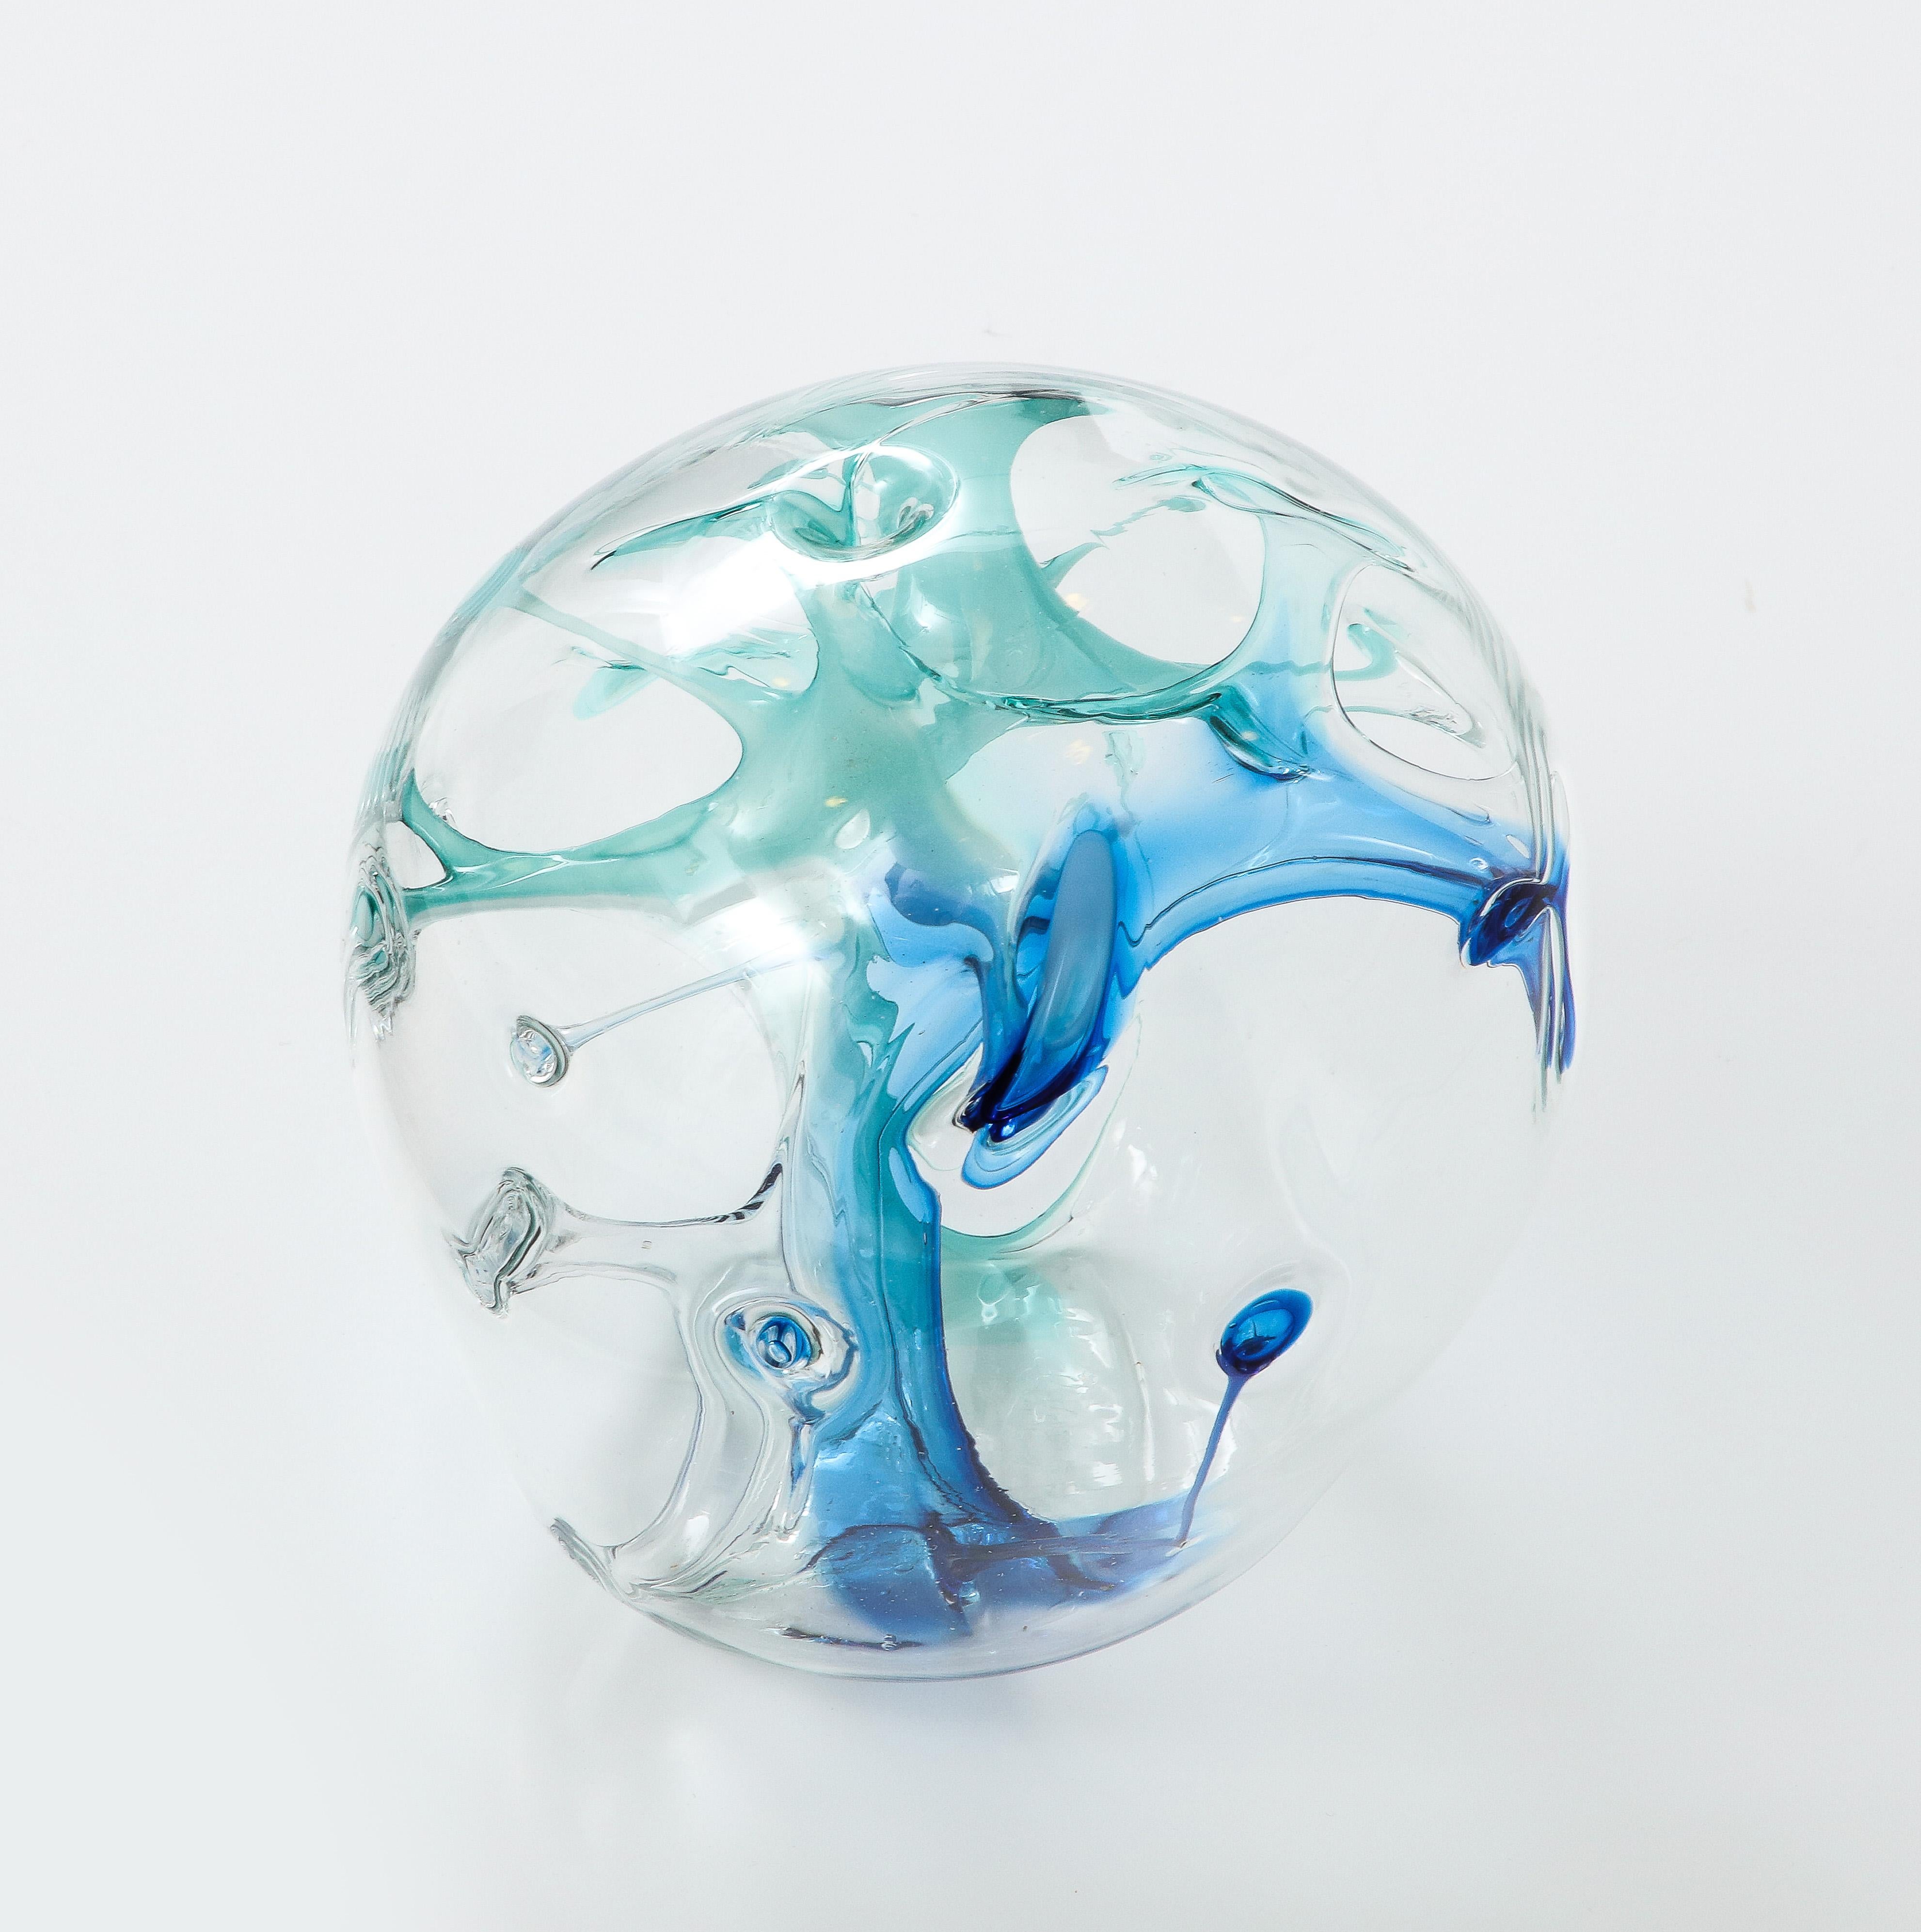 Peter Bramhall glass Orb sculpture signed and dated.
The clear glass orb has internal glass threads in aqua and blue tones.